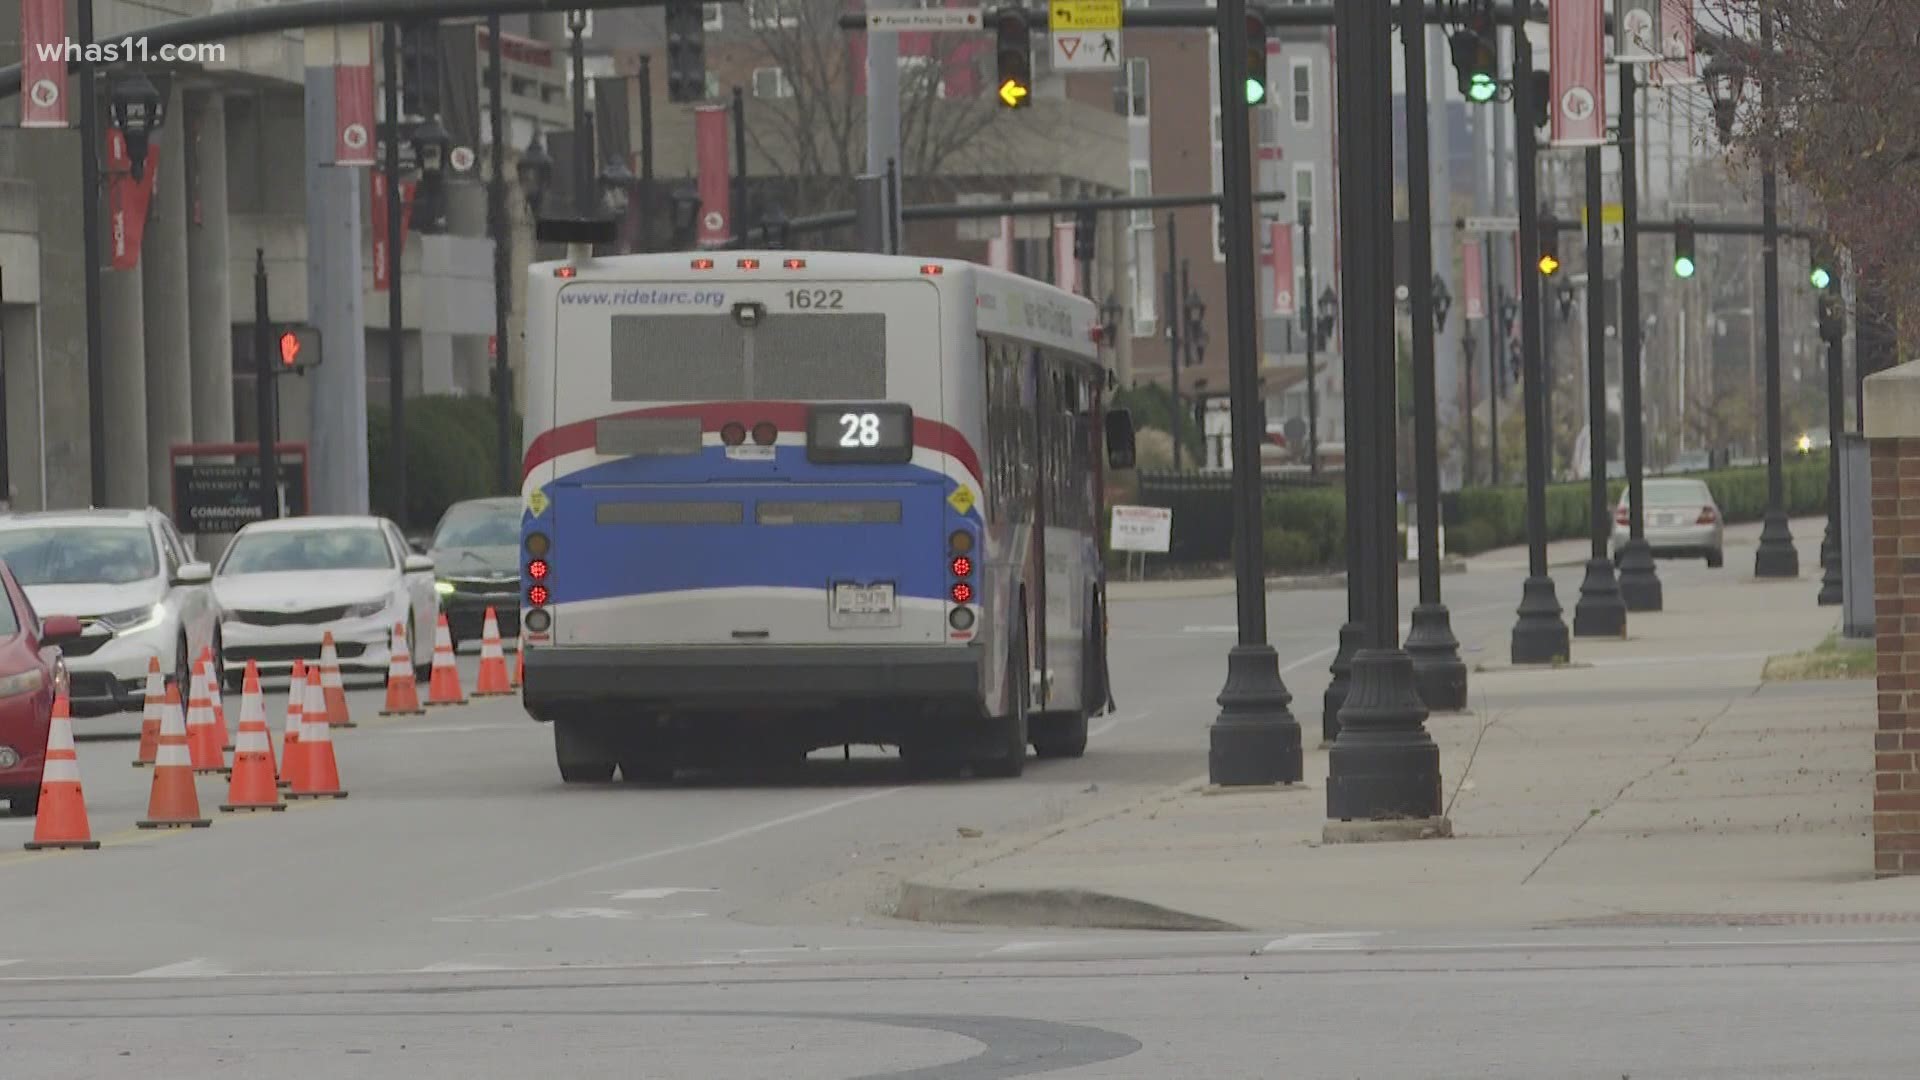 LMPD tells us a female passenger got on the bus at the campus station...that lies at the corner of Floyd and University.